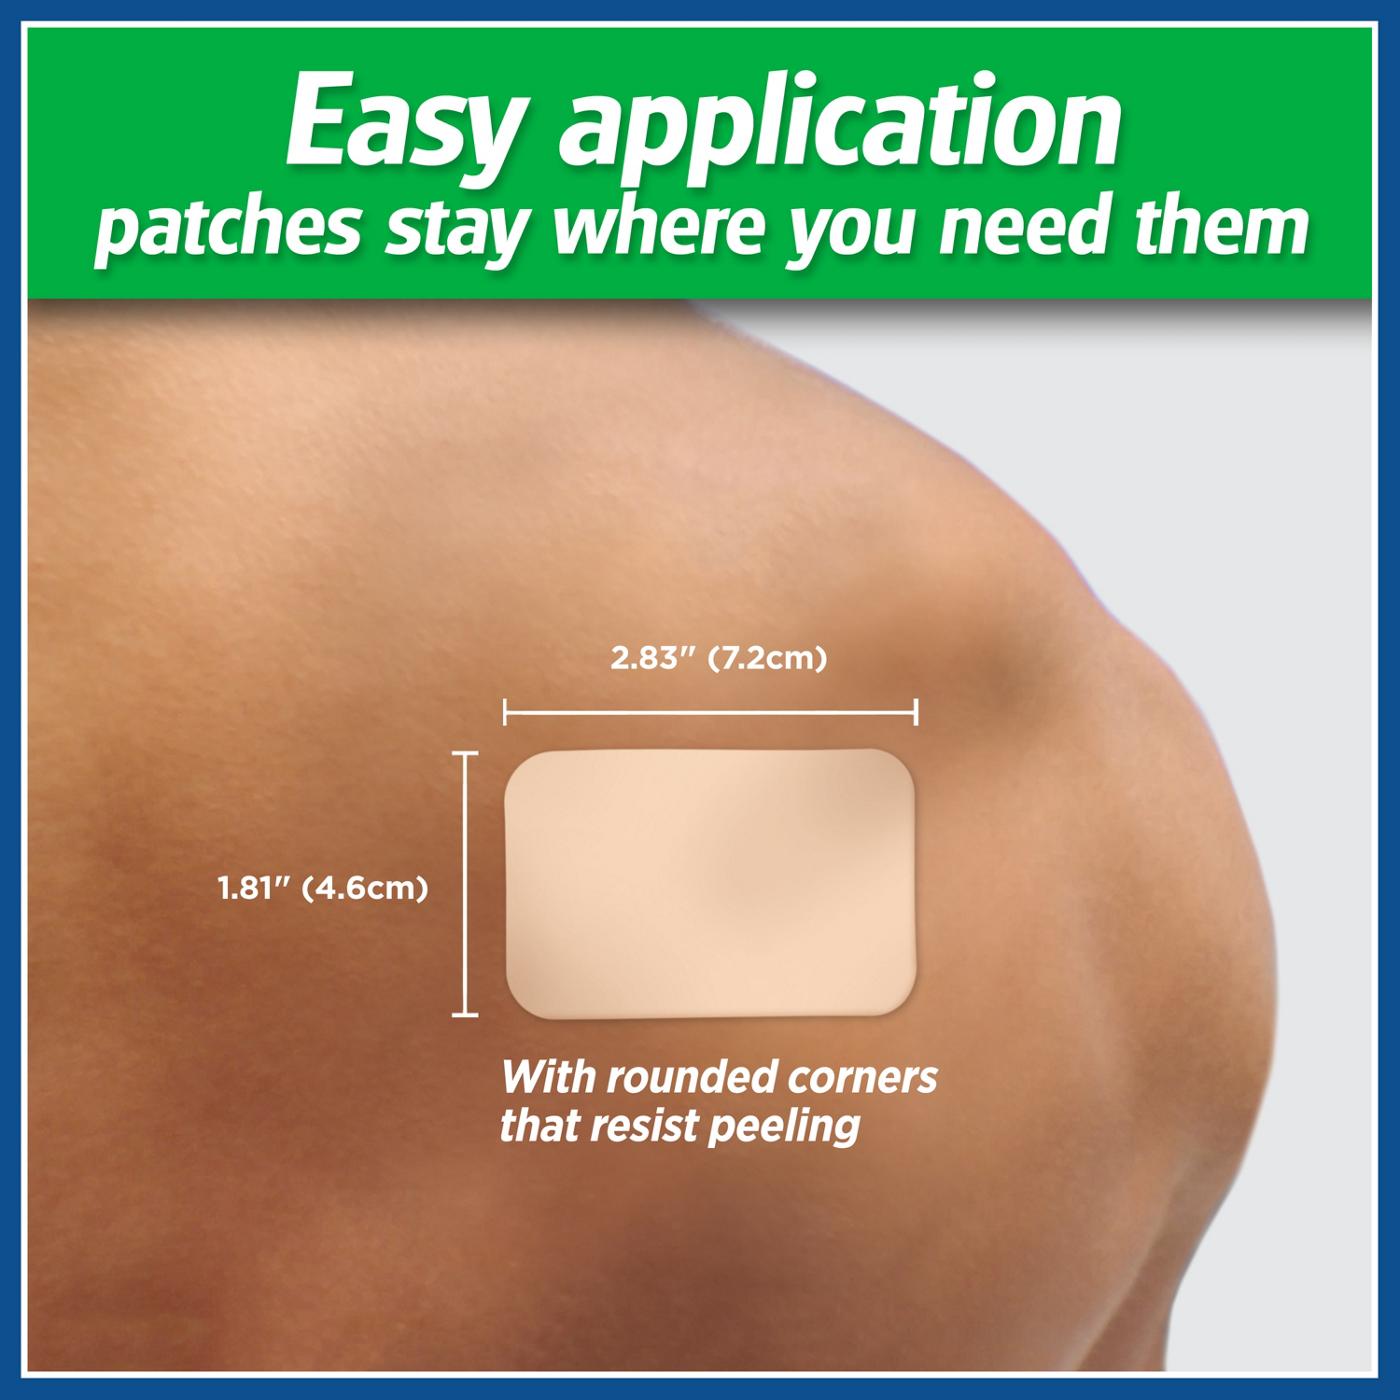 Salonpas Pain Relieving Patch; image 4 of 6